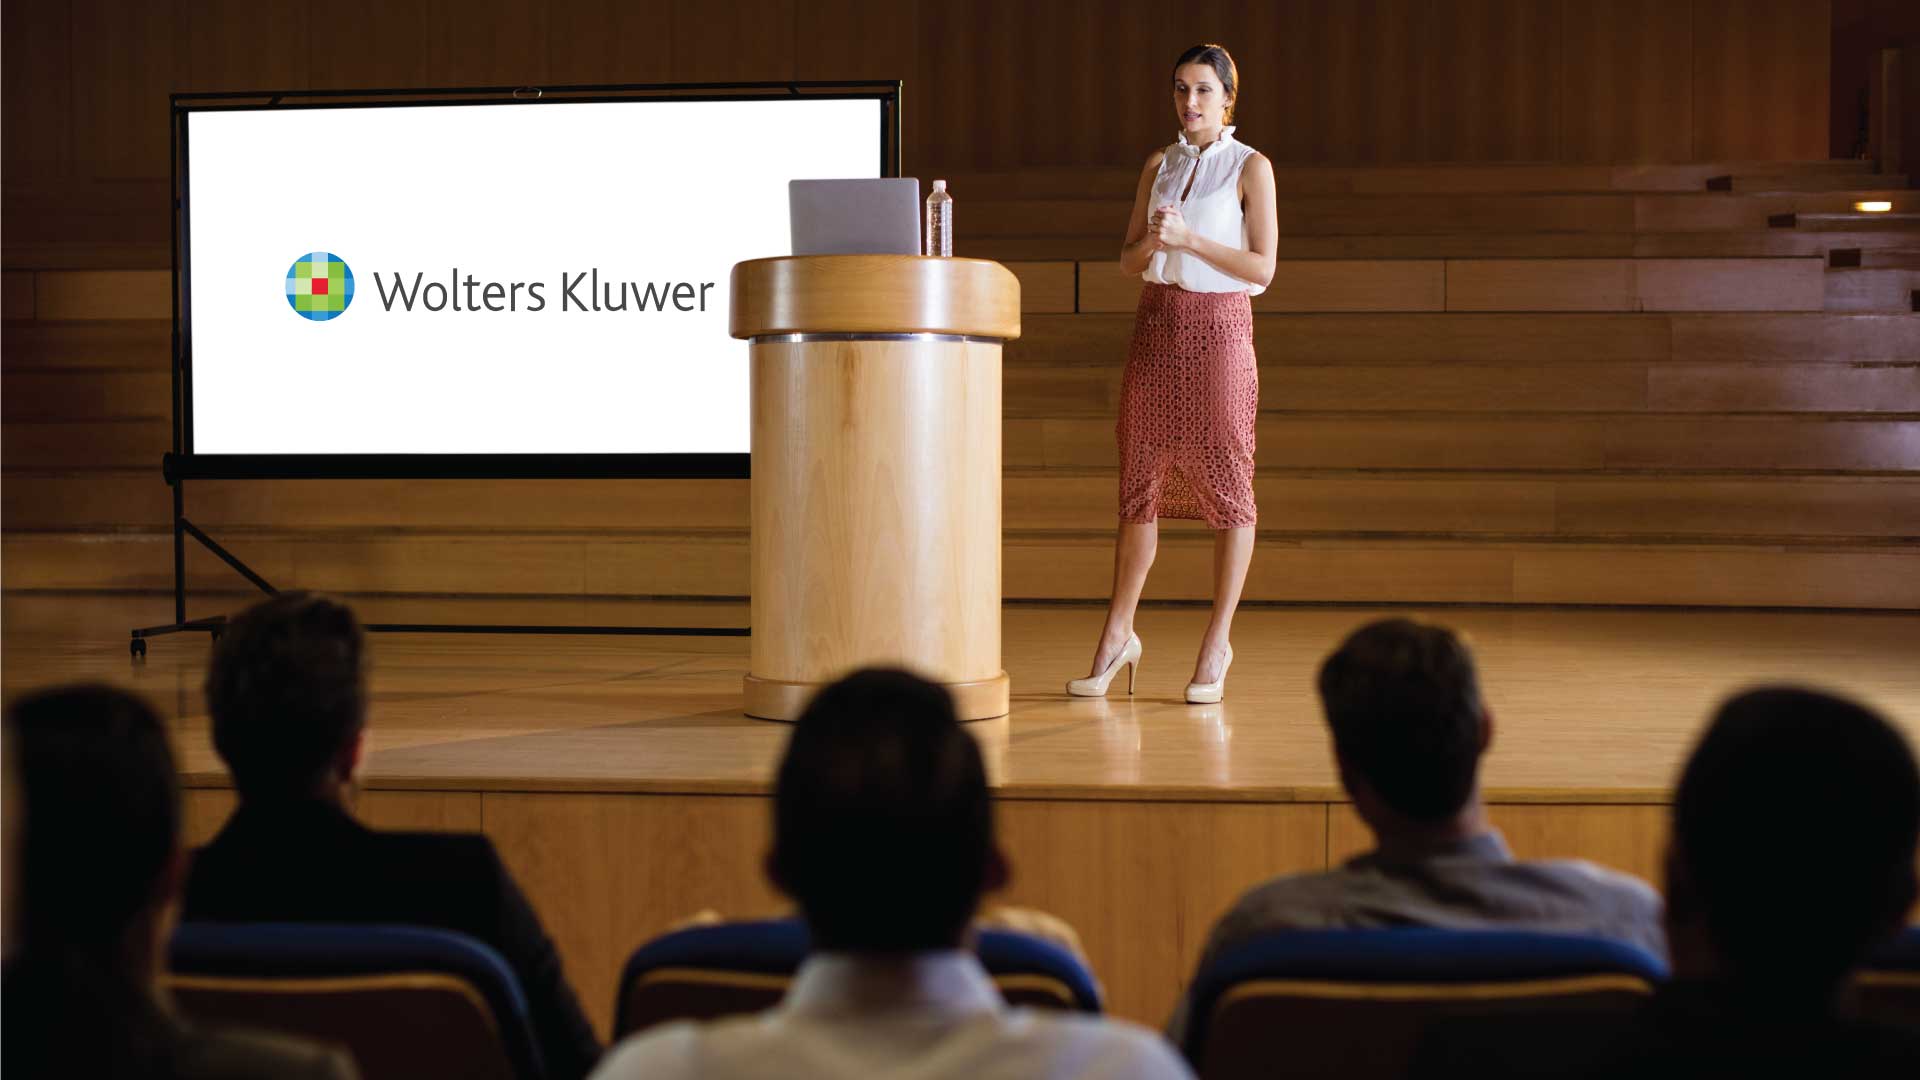 Wolters Kluwer VP Amy Kolzow to present at Sitecore Symposium